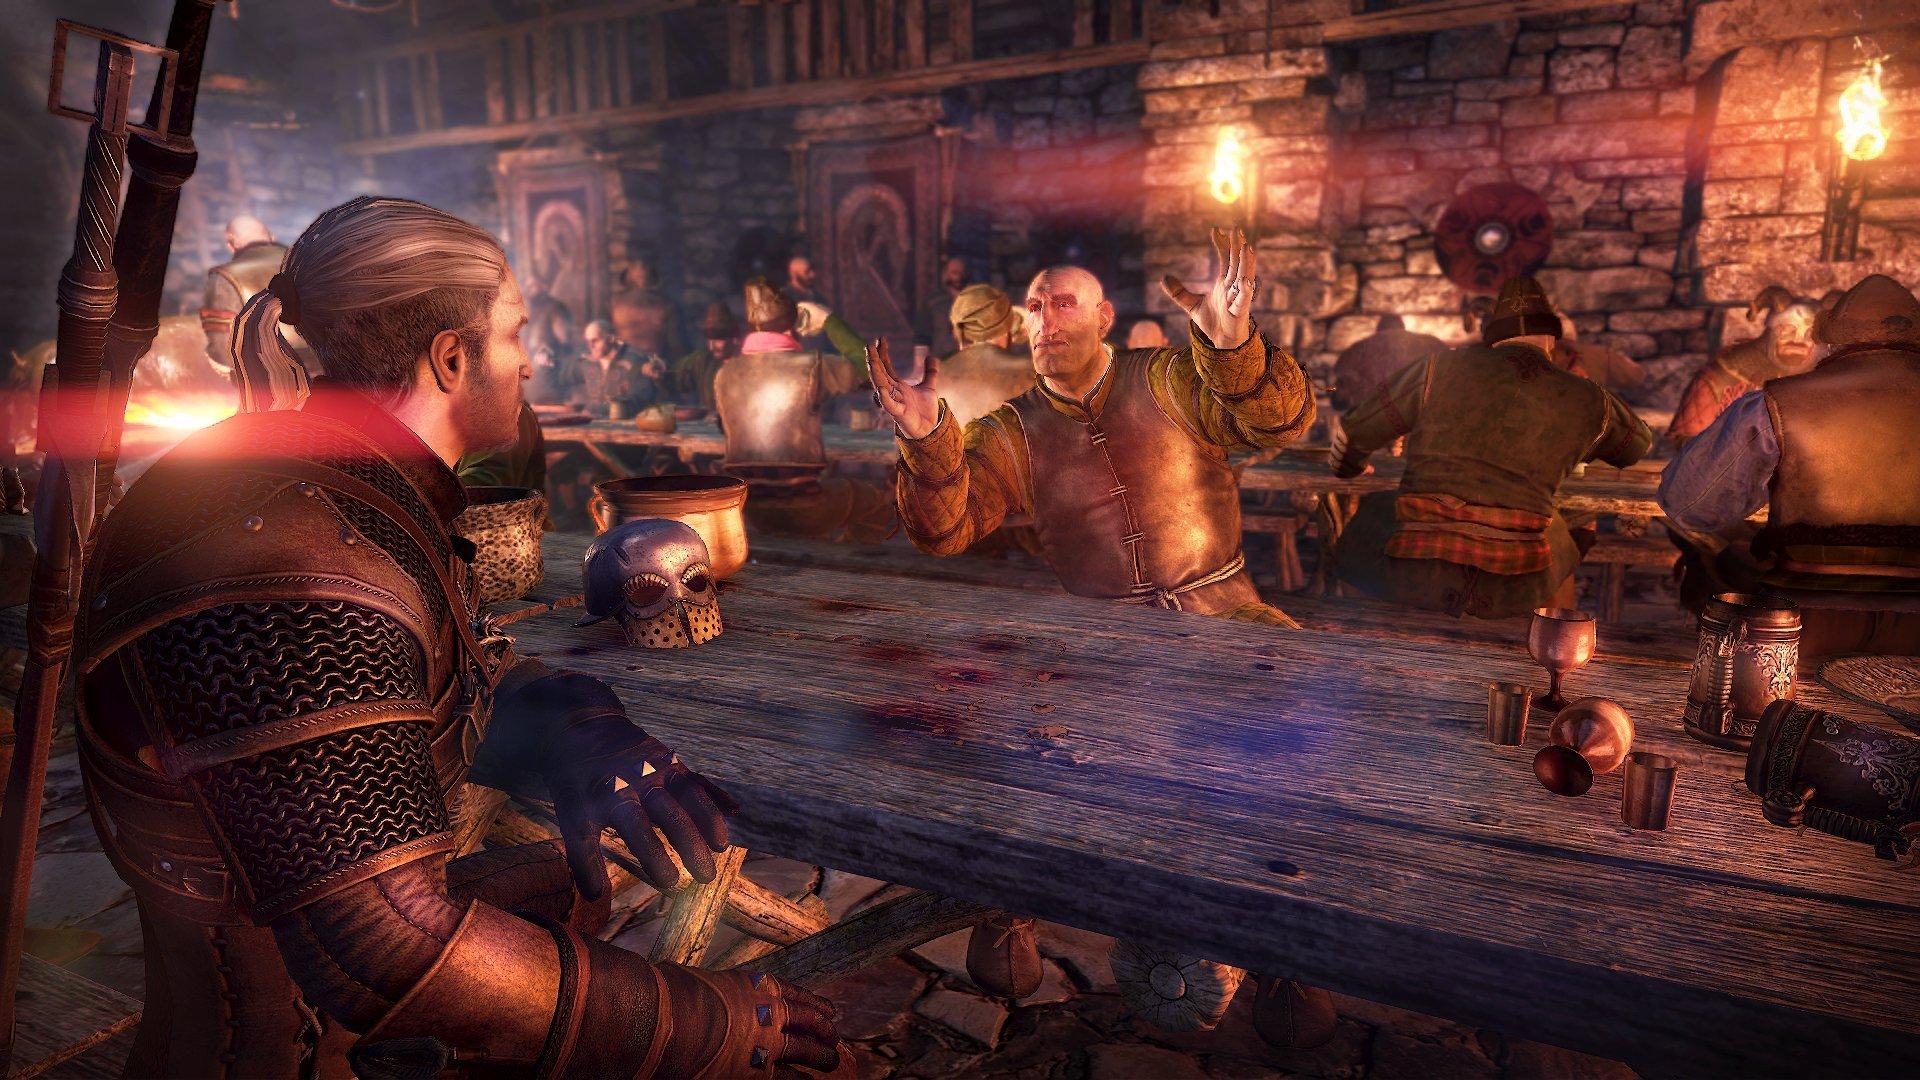 Gadgets, games, hard'n'soft: My three hours with The Witcher 3: Wild Hunt